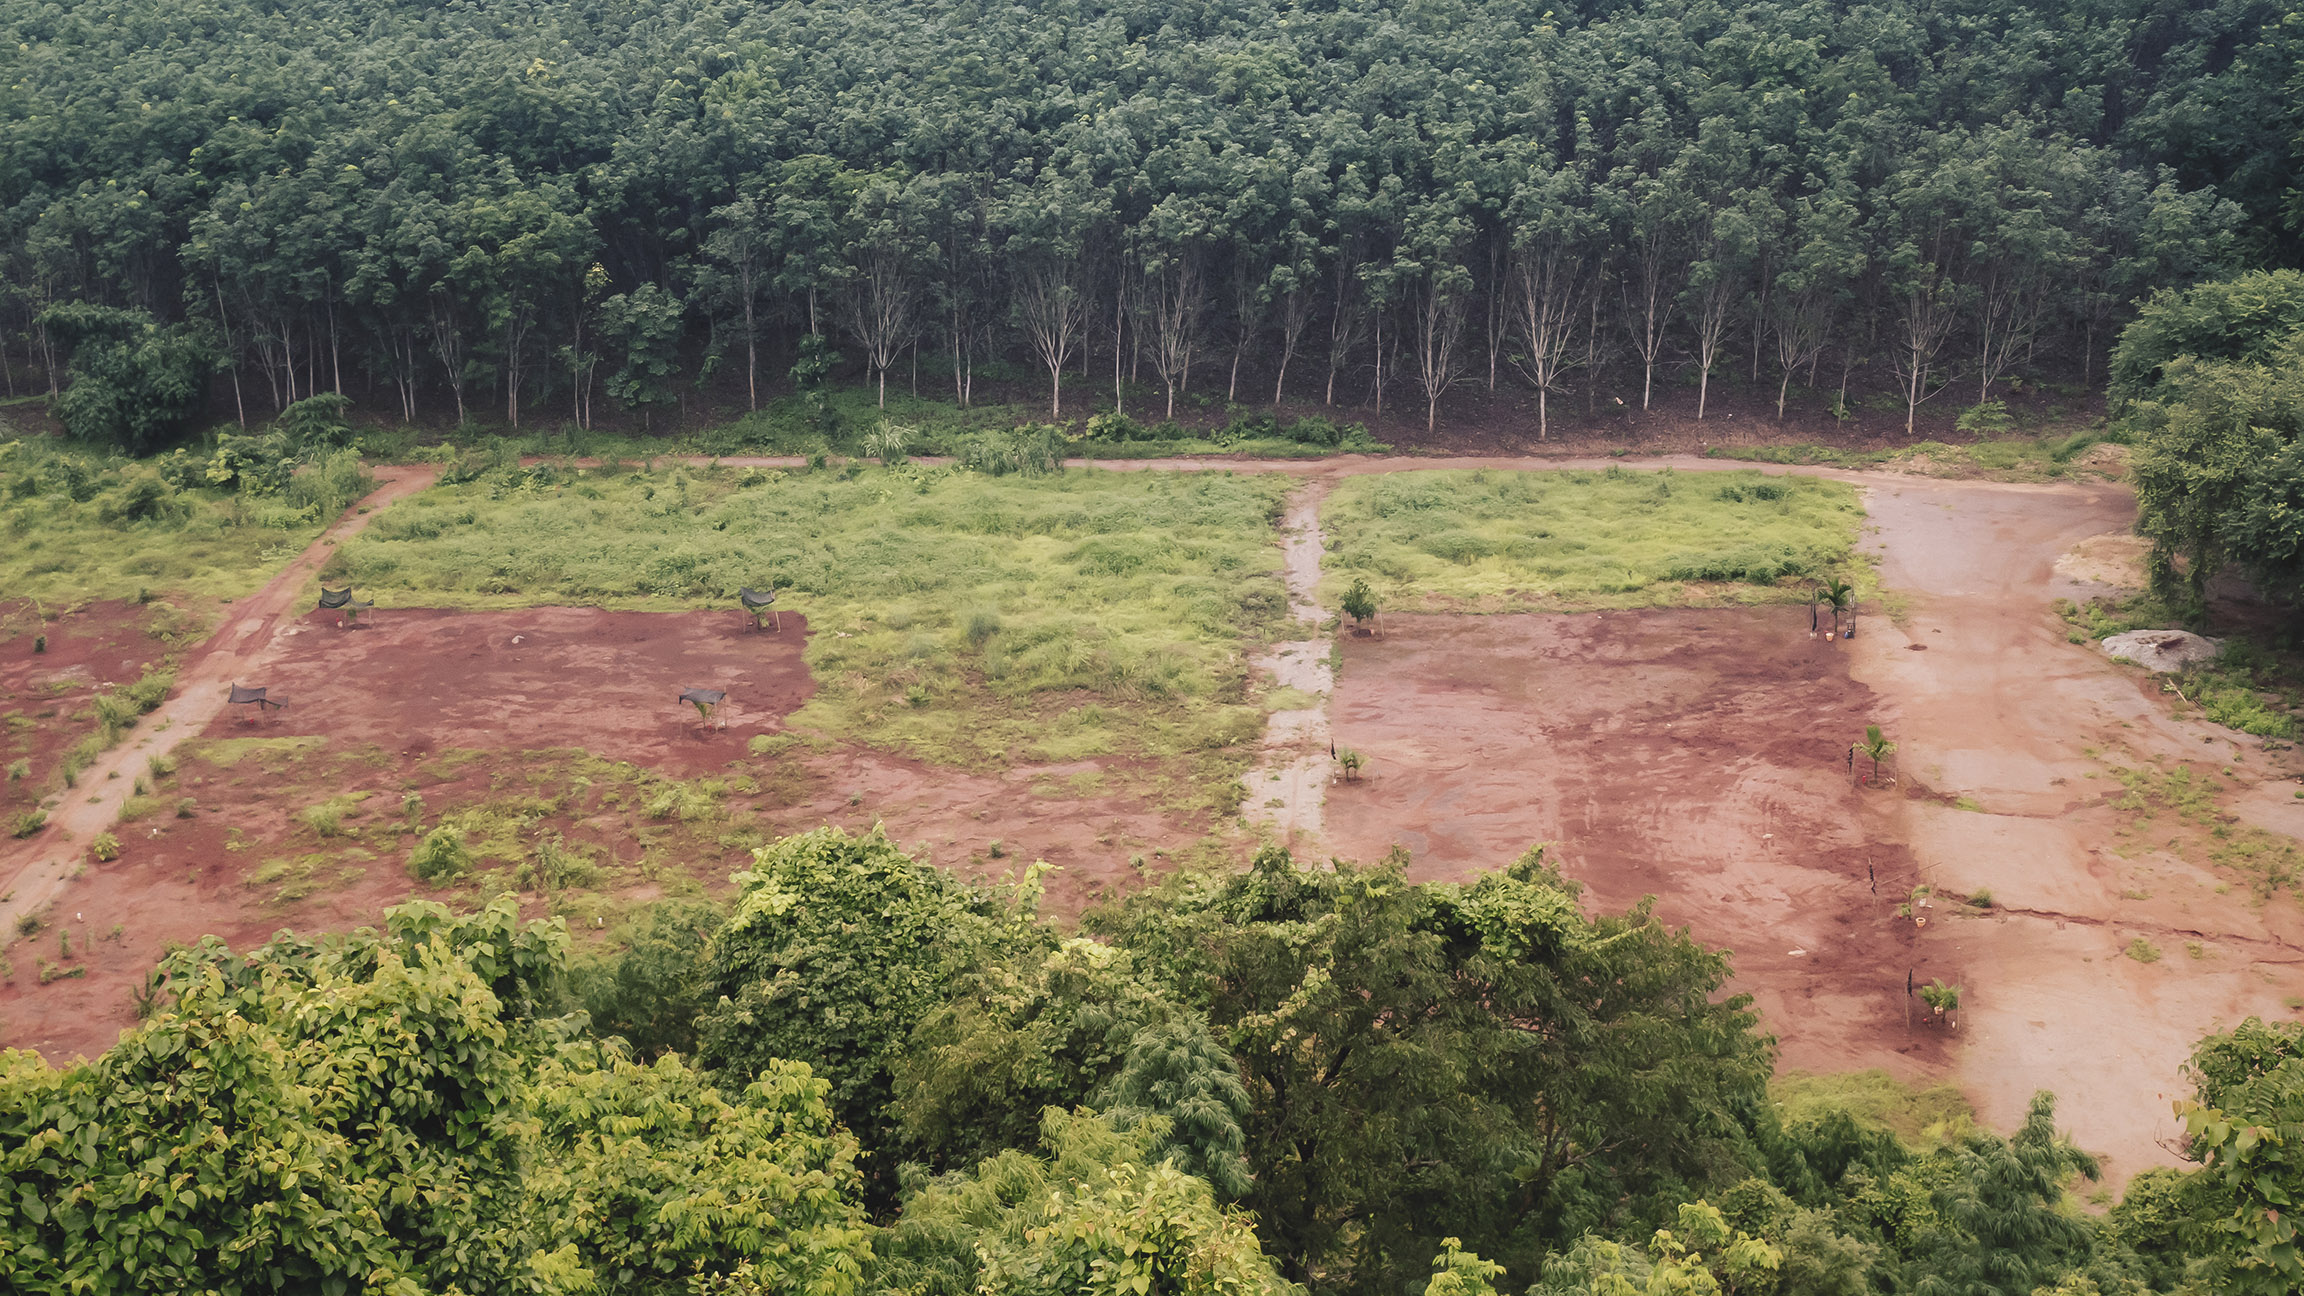 Through DETER's Lens: The Relationship between Degradation and  Deforestation in the  - CPI